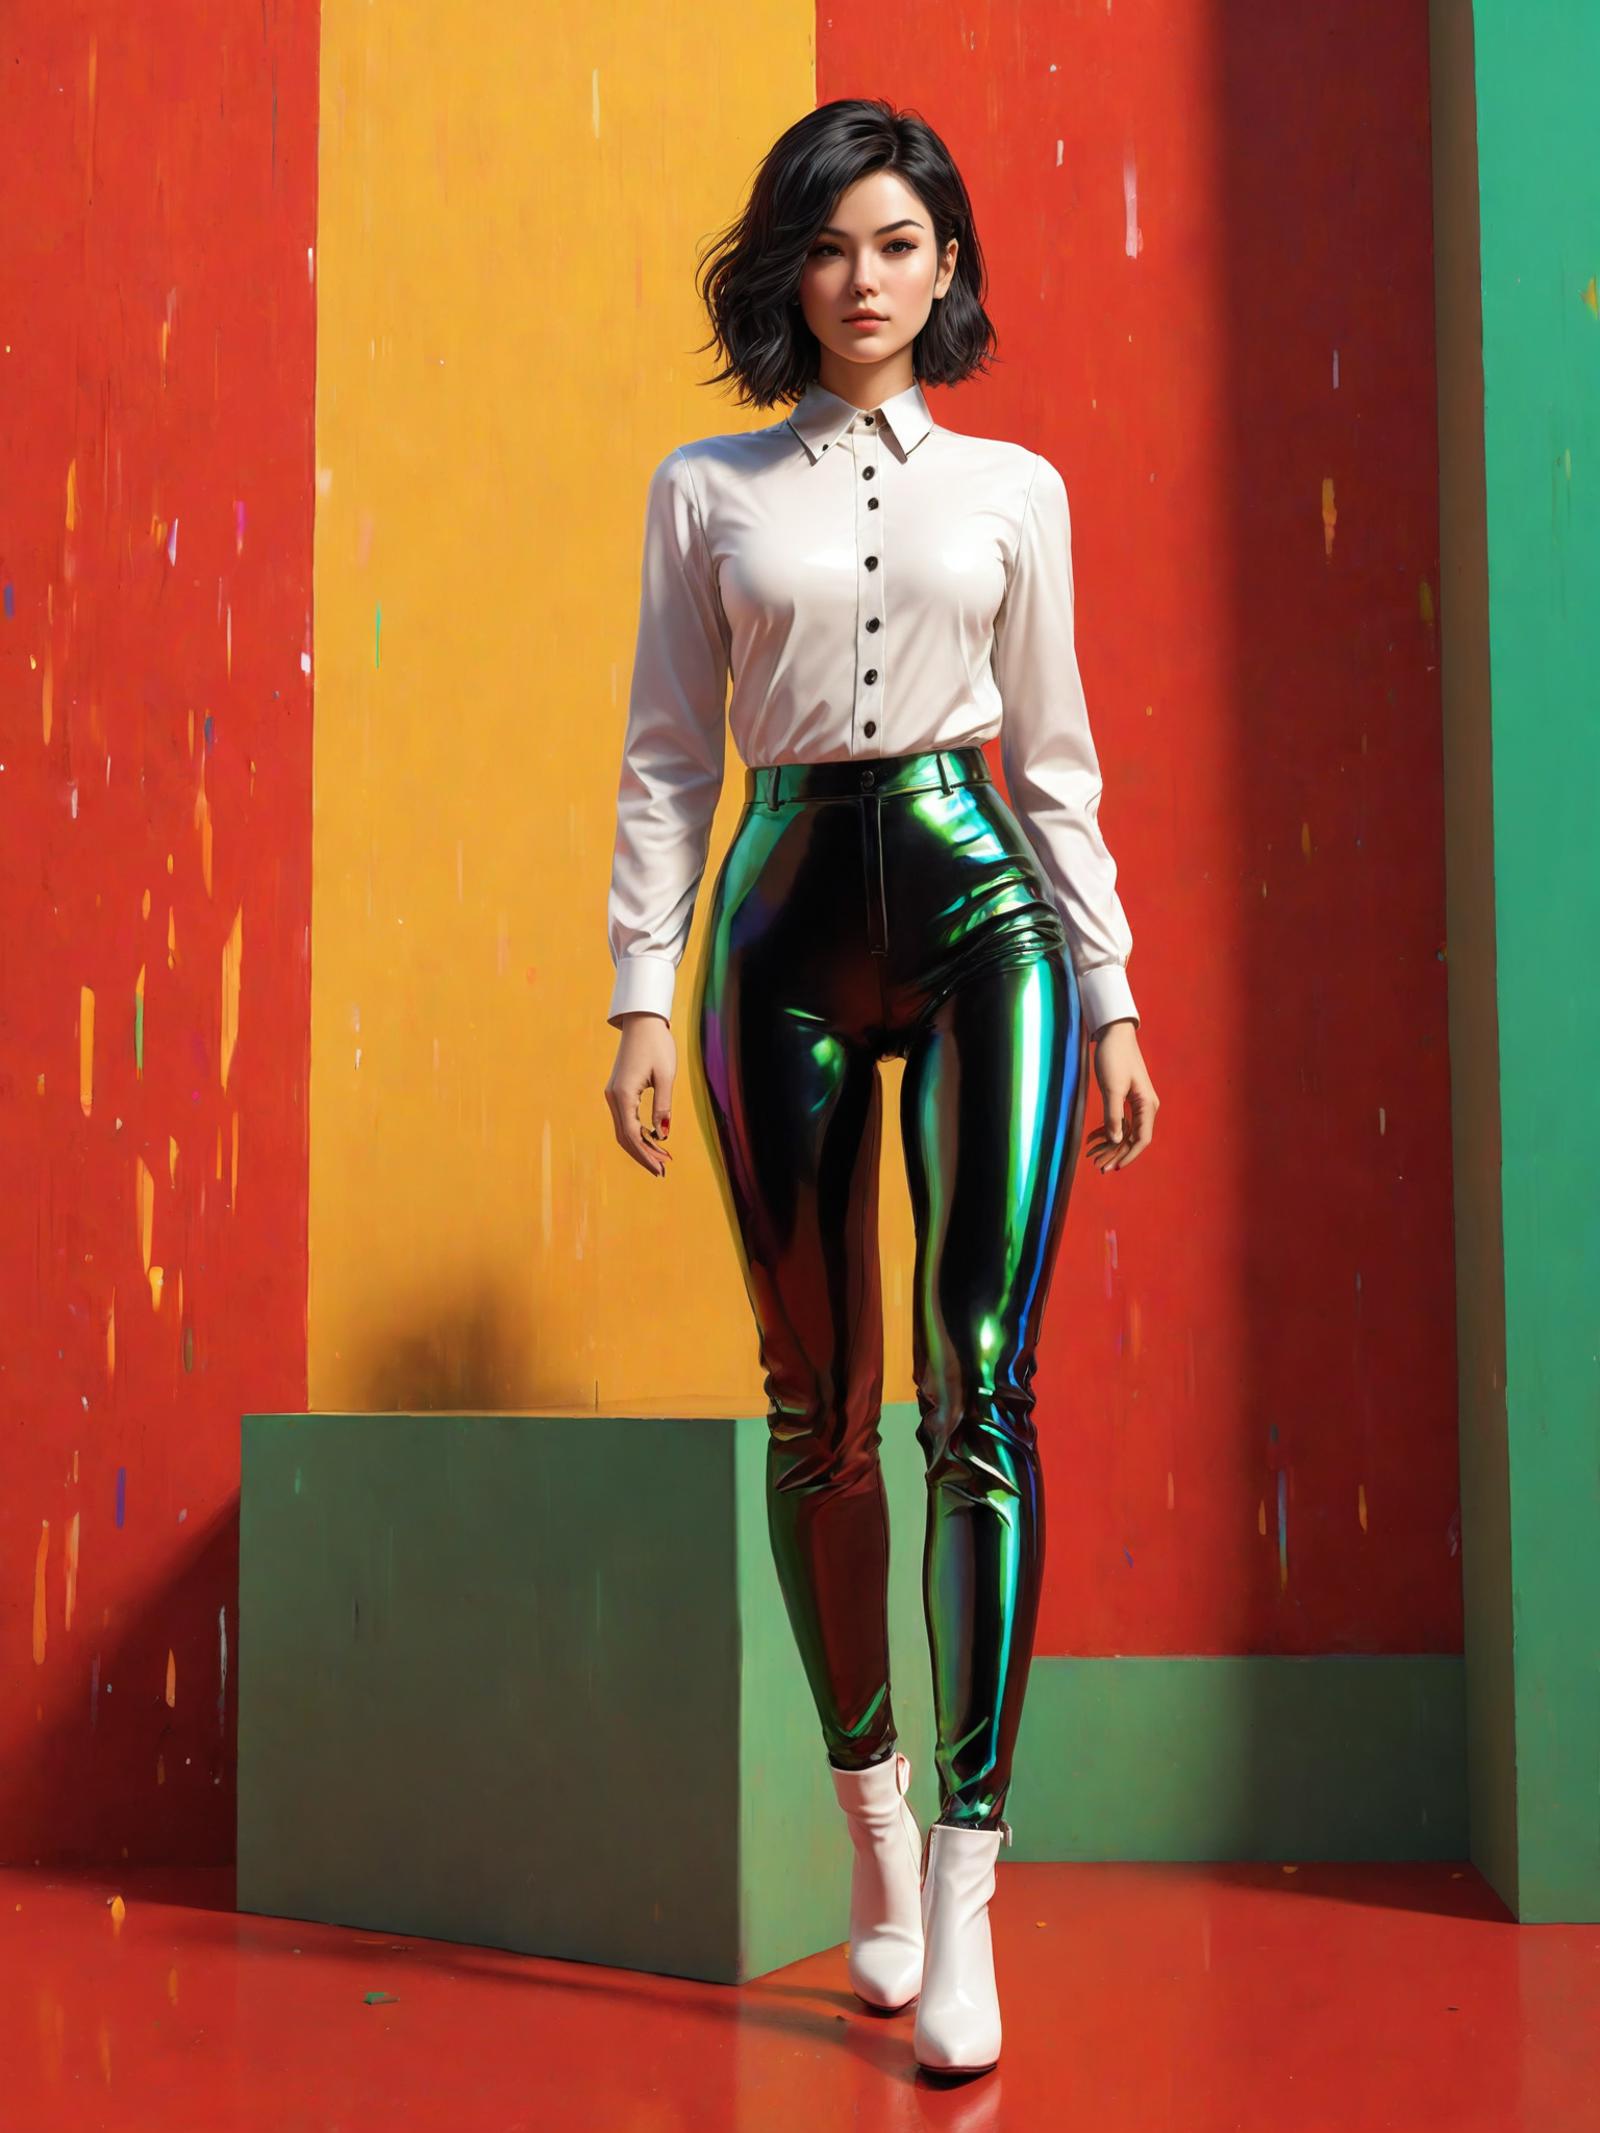 A woman wearing a white shirt and tight green pants standing against a colorful wall.